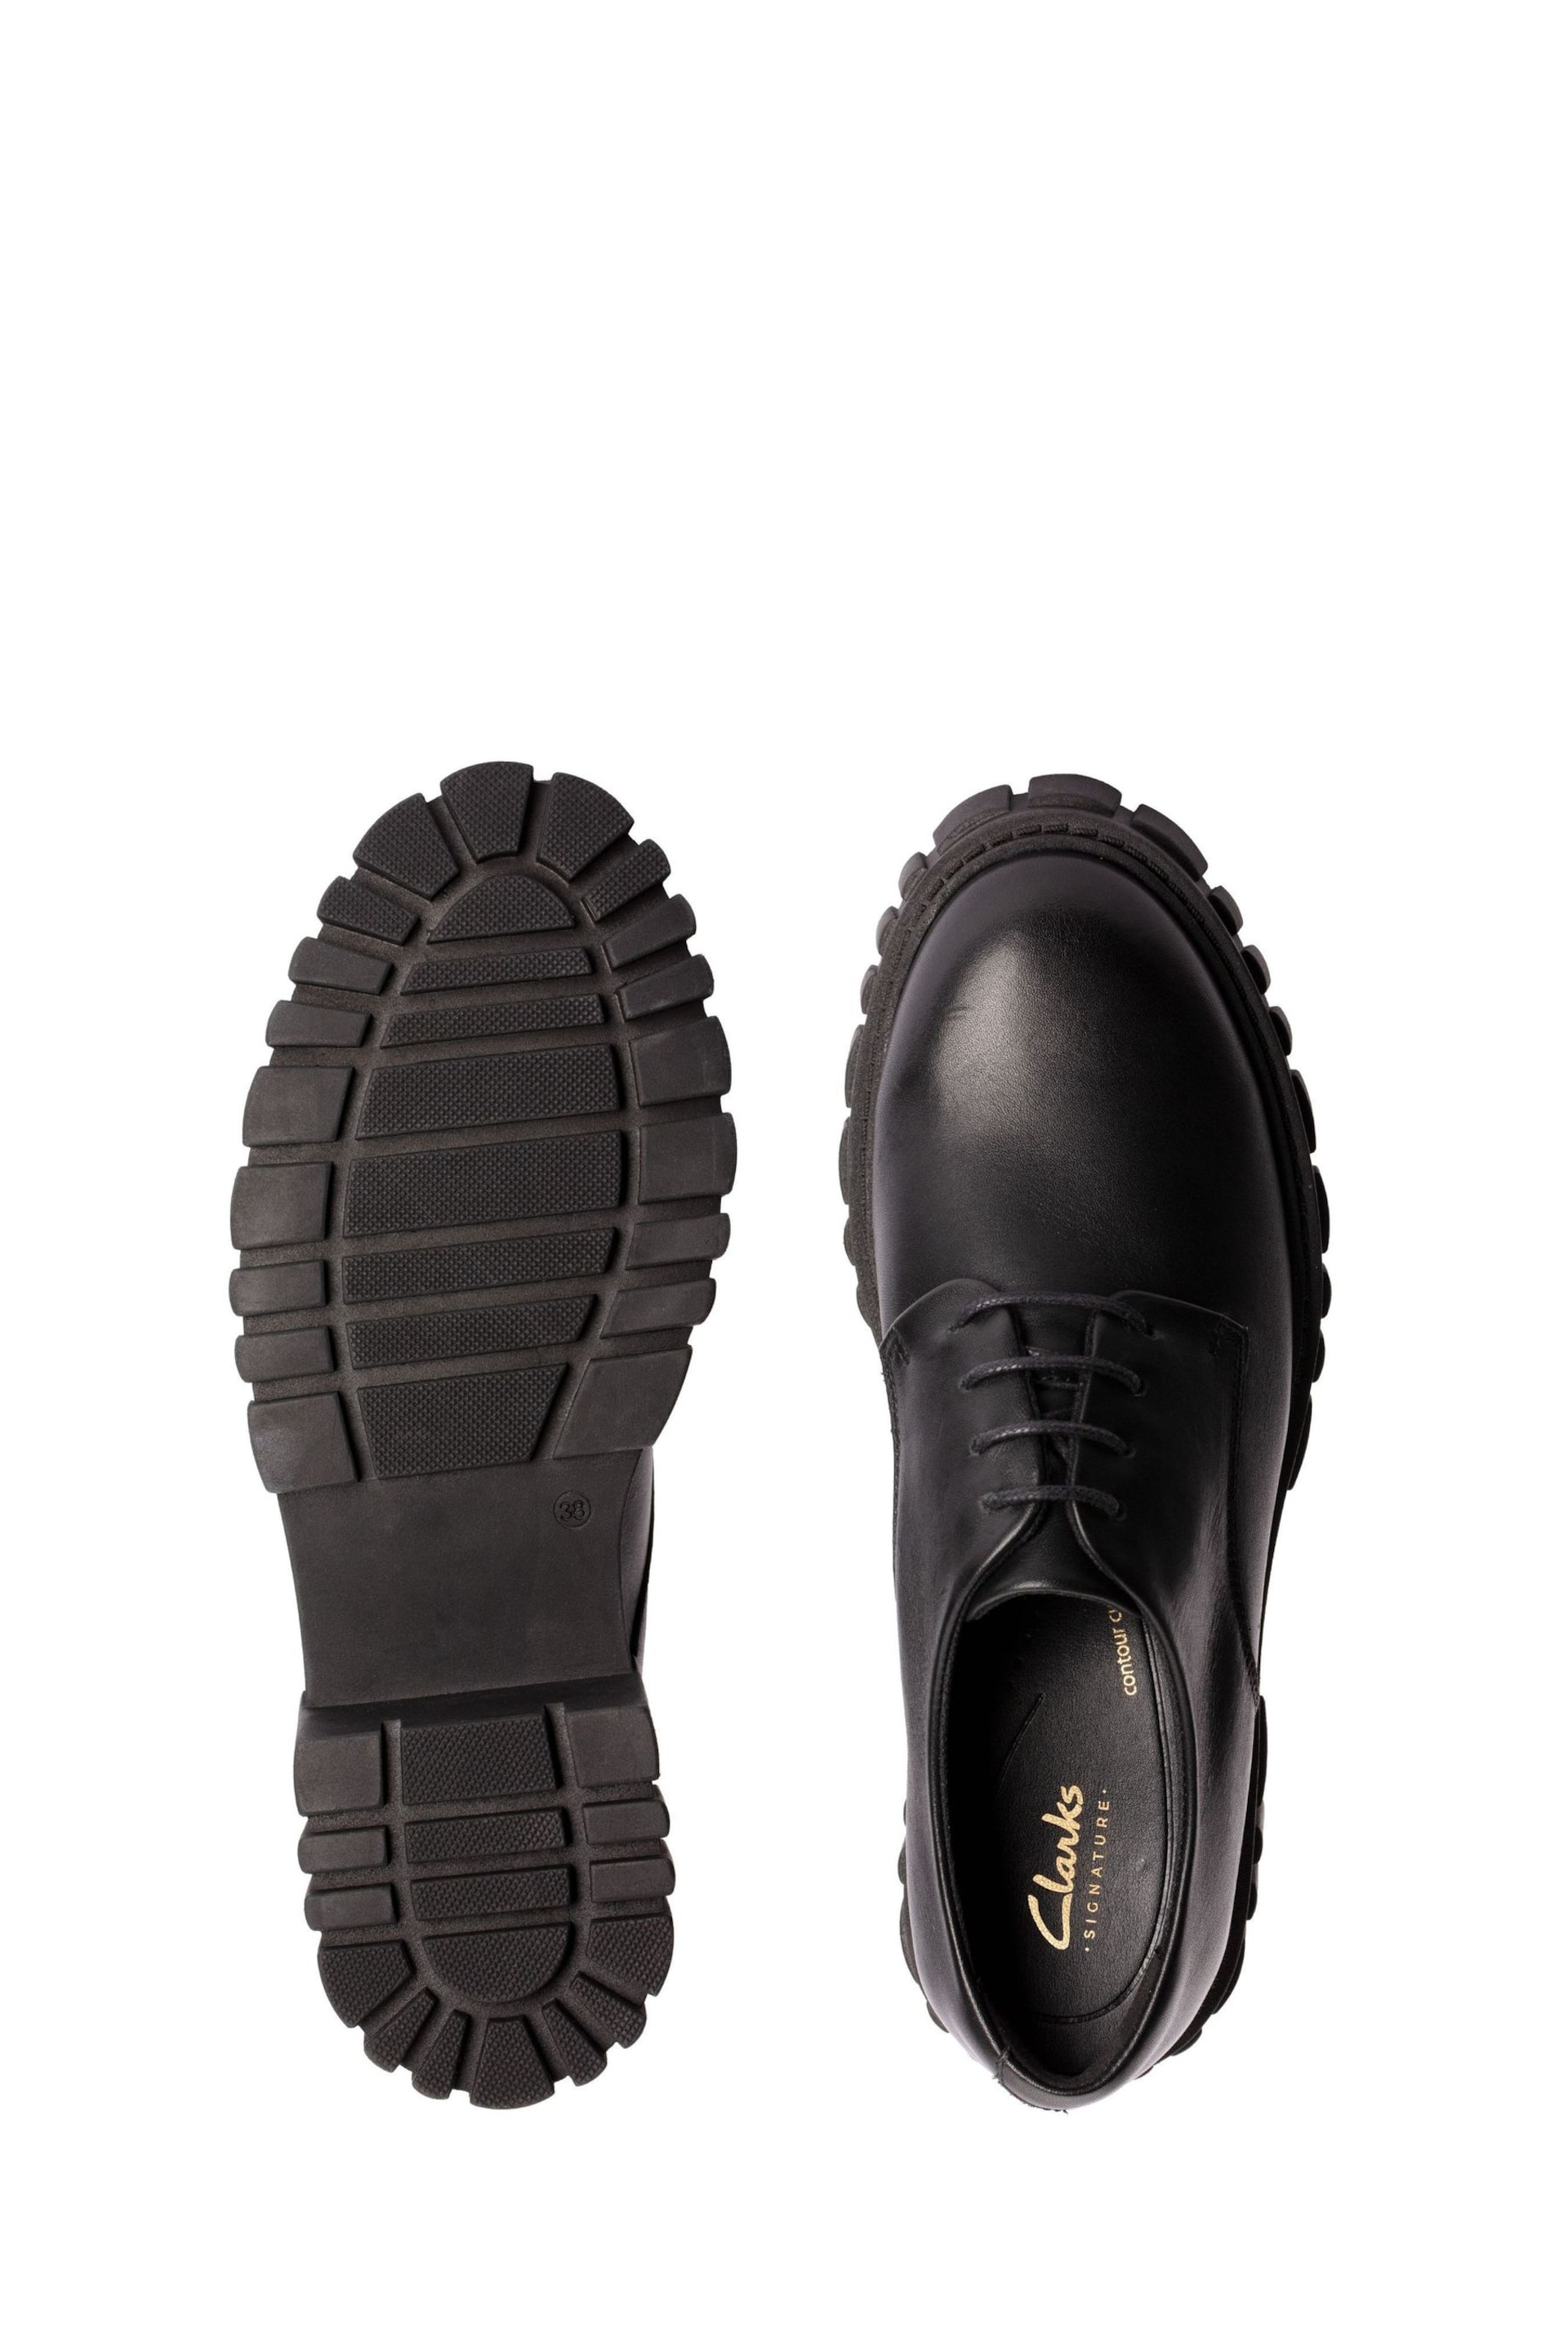 Clarks Black Leather Page Walk Shoes - Image 7 of 7